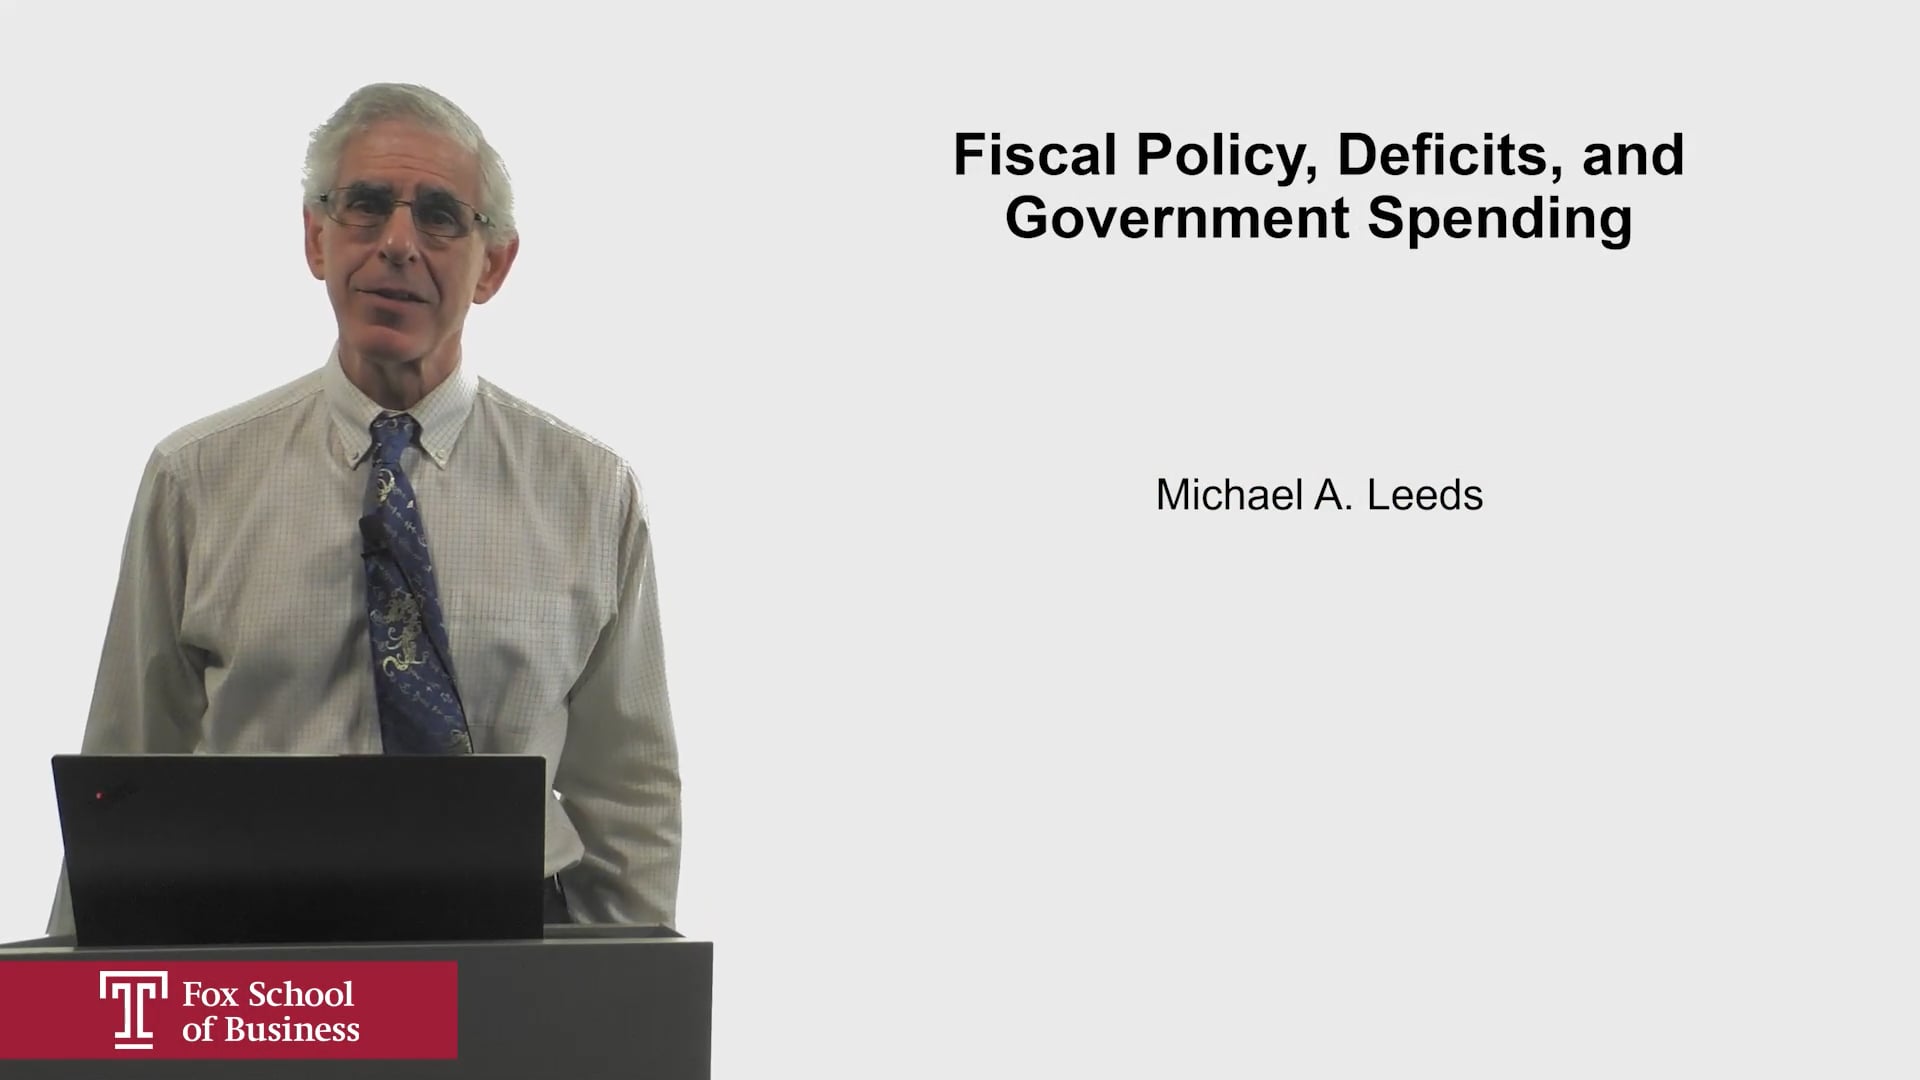 Fiscal Policy, Deficits, and Government Spending